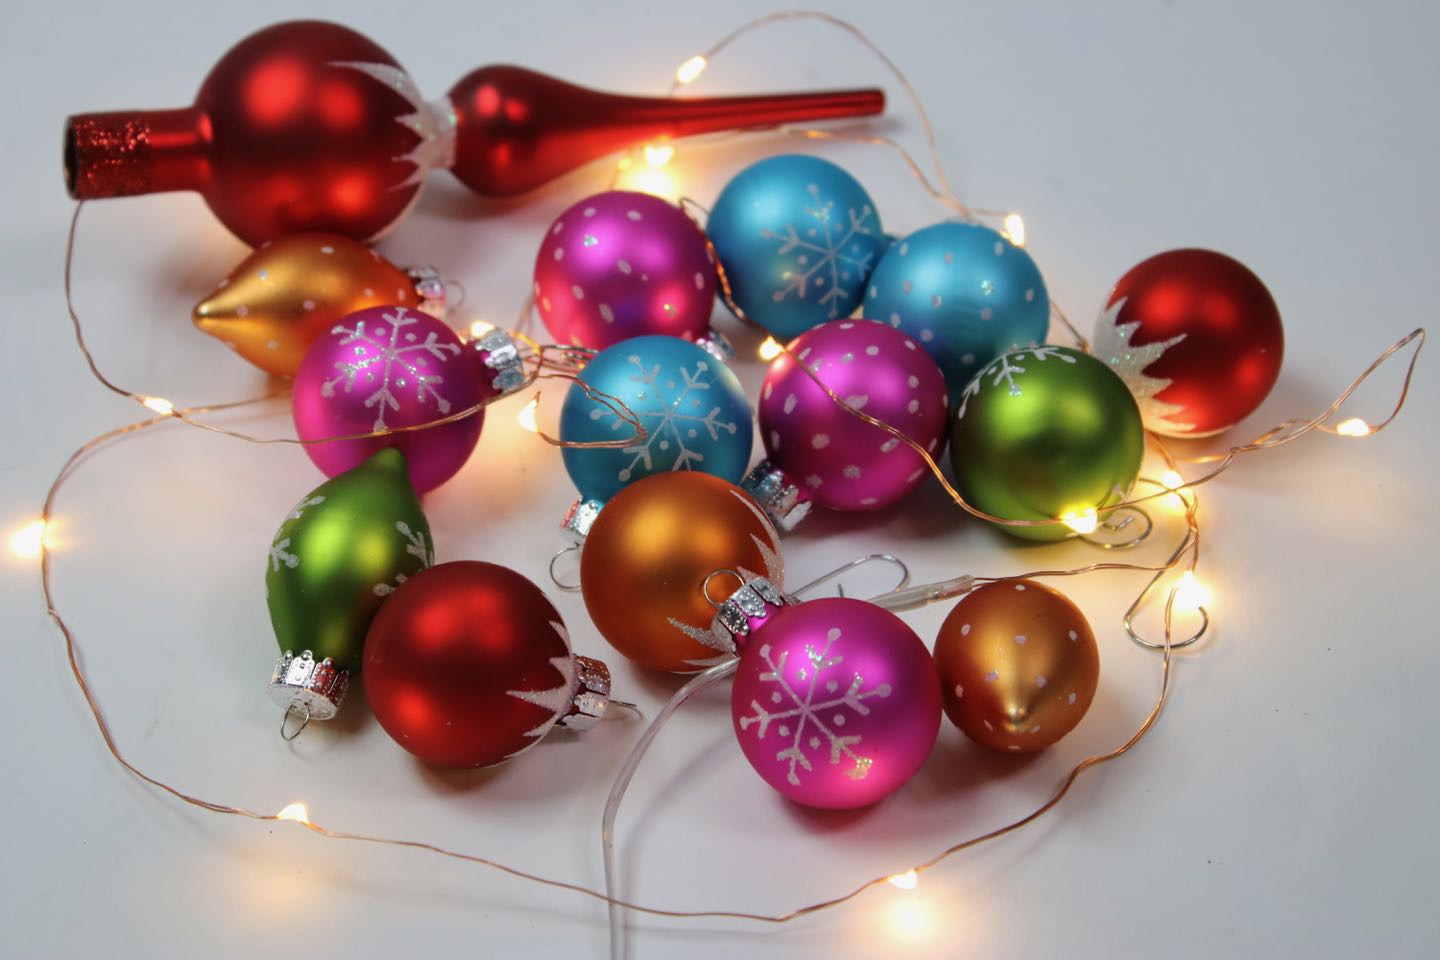 Christmas Ornaments and Lights - Simply Beautiful